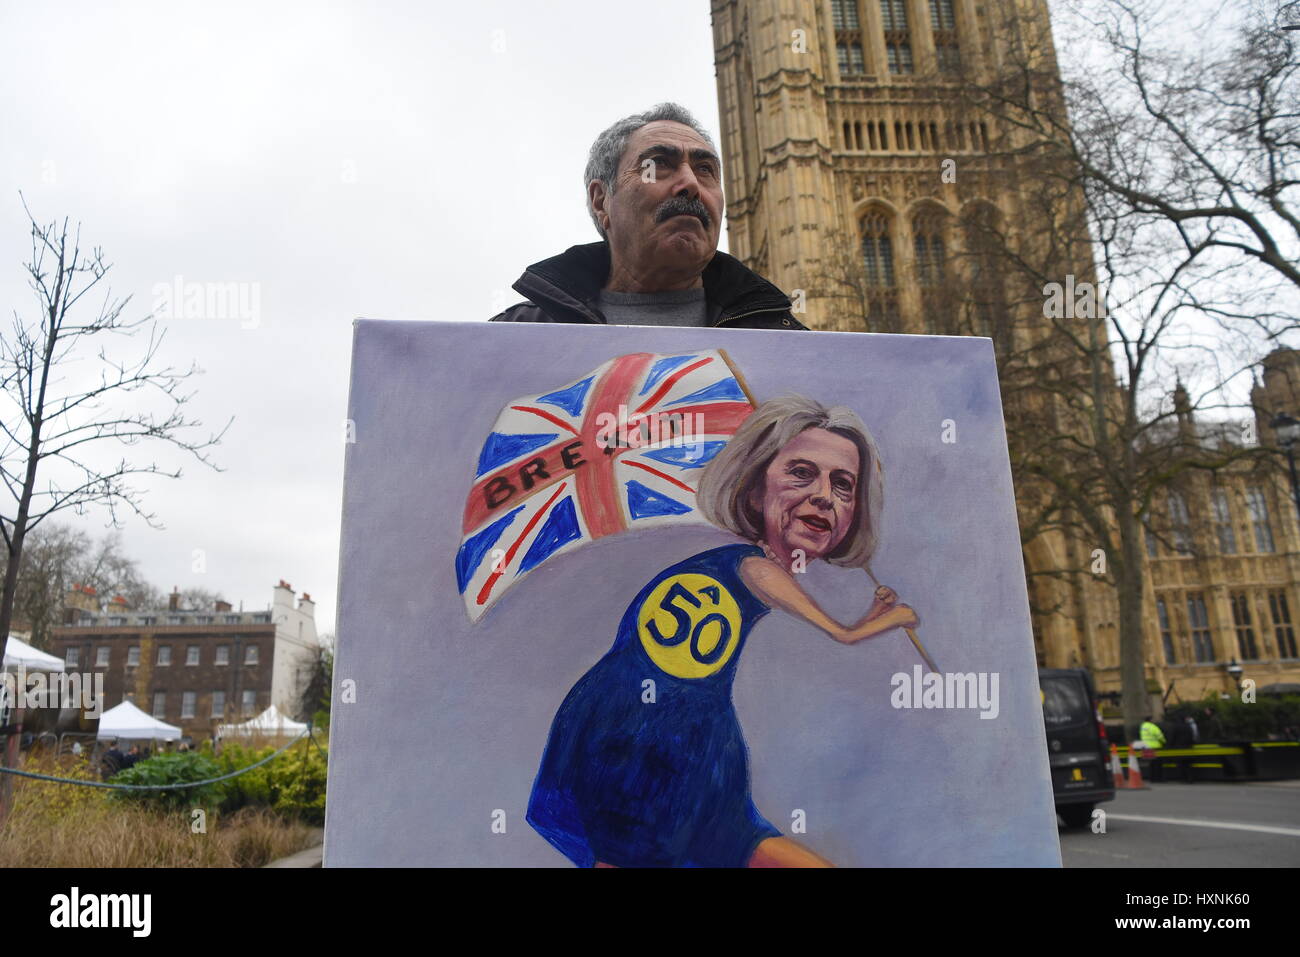 London, UK. 29th Mar, 2017. Anti-Brexit demonstrators show EU flags outside Downing Street and the Houses of Parliament. The Government has triggered Article 50 of Lisbon Treaty to leave the European Union. Credit: Alberto Pezzali/Pacific Press/Alamy Live News Stock Photo